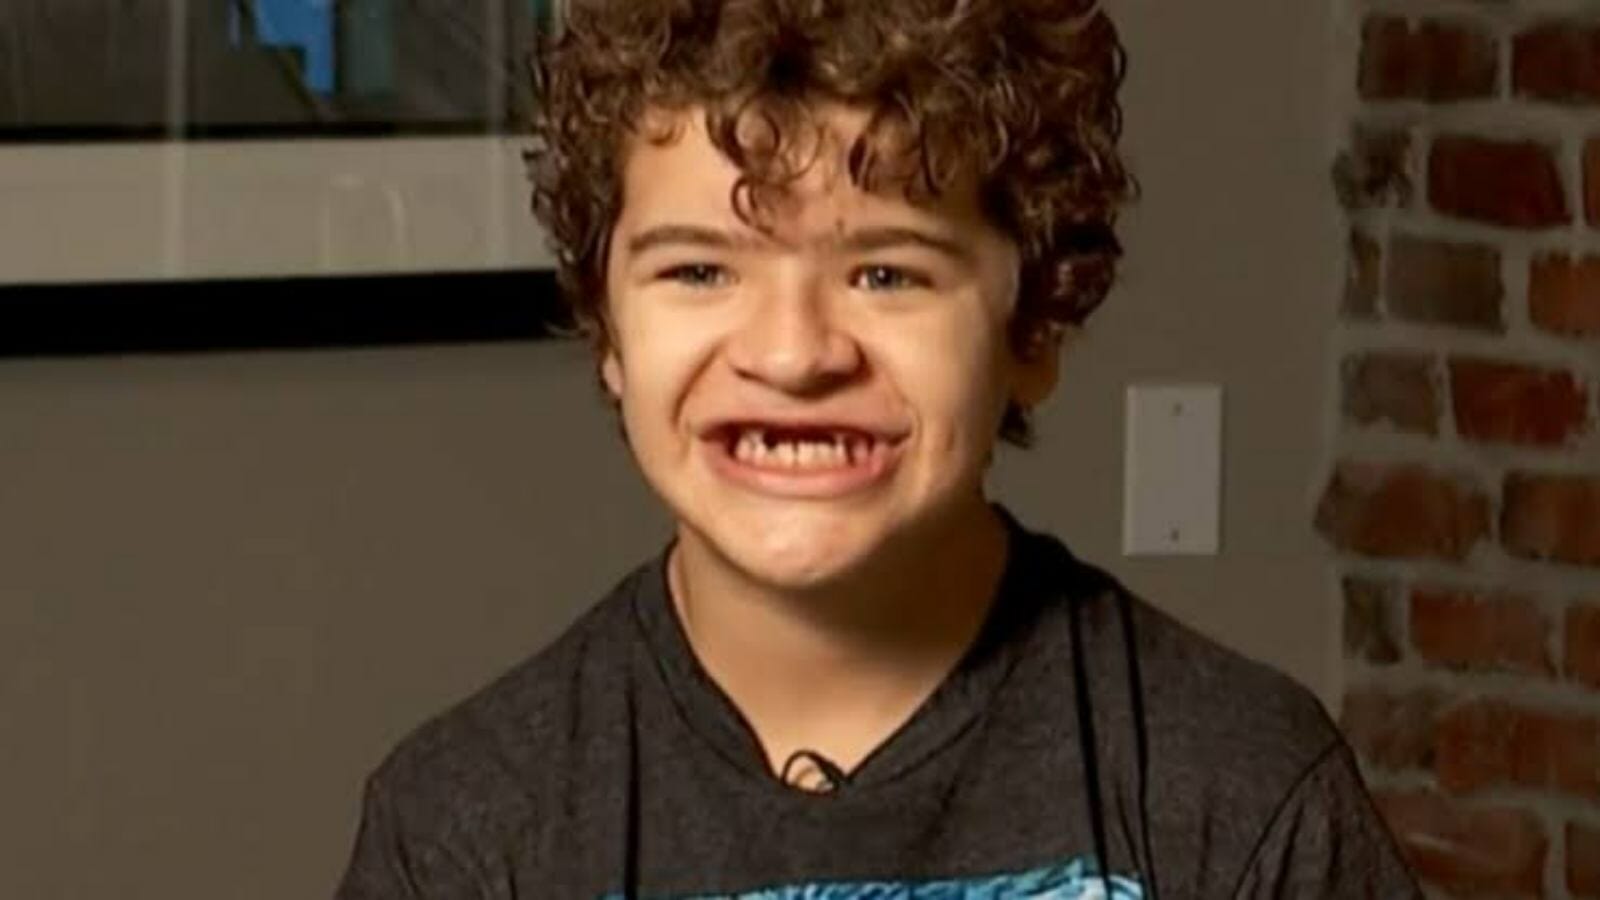 Stranger Things Star Gaten Matarazzo Opens Up About The Rare Medical Condition He Lives With 7290